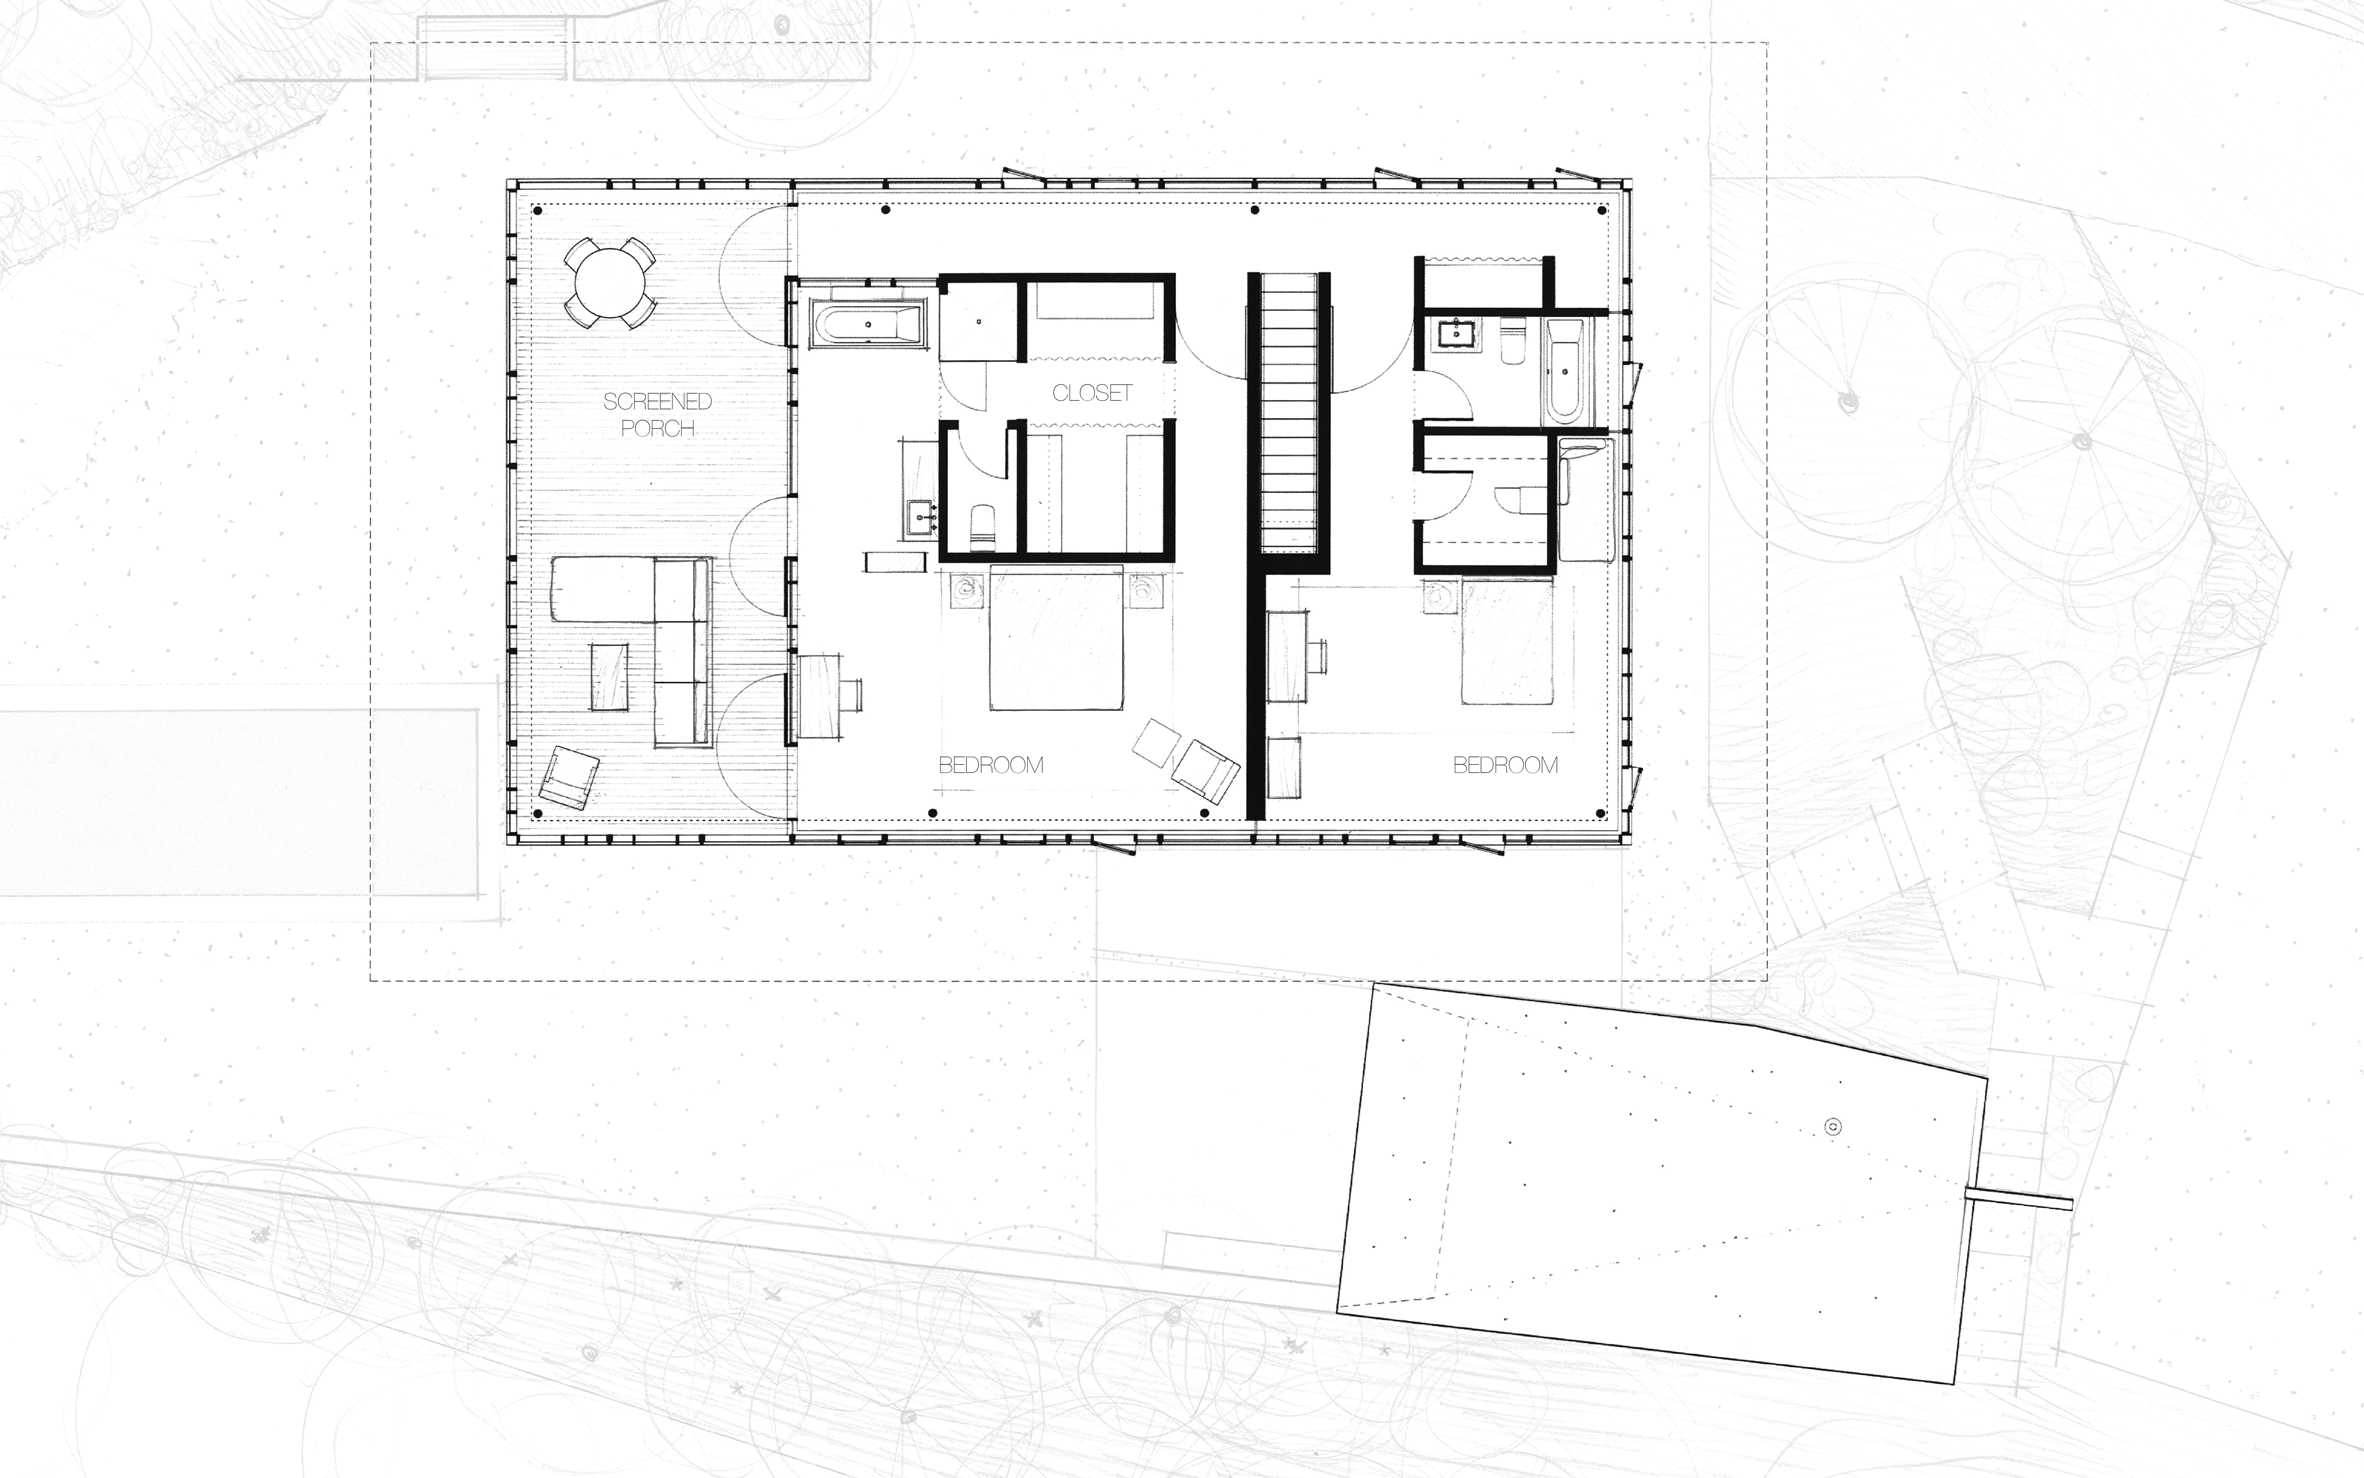 balcones-mell-lawrence-architects_dezeen_2364_first-floor-plan.gif